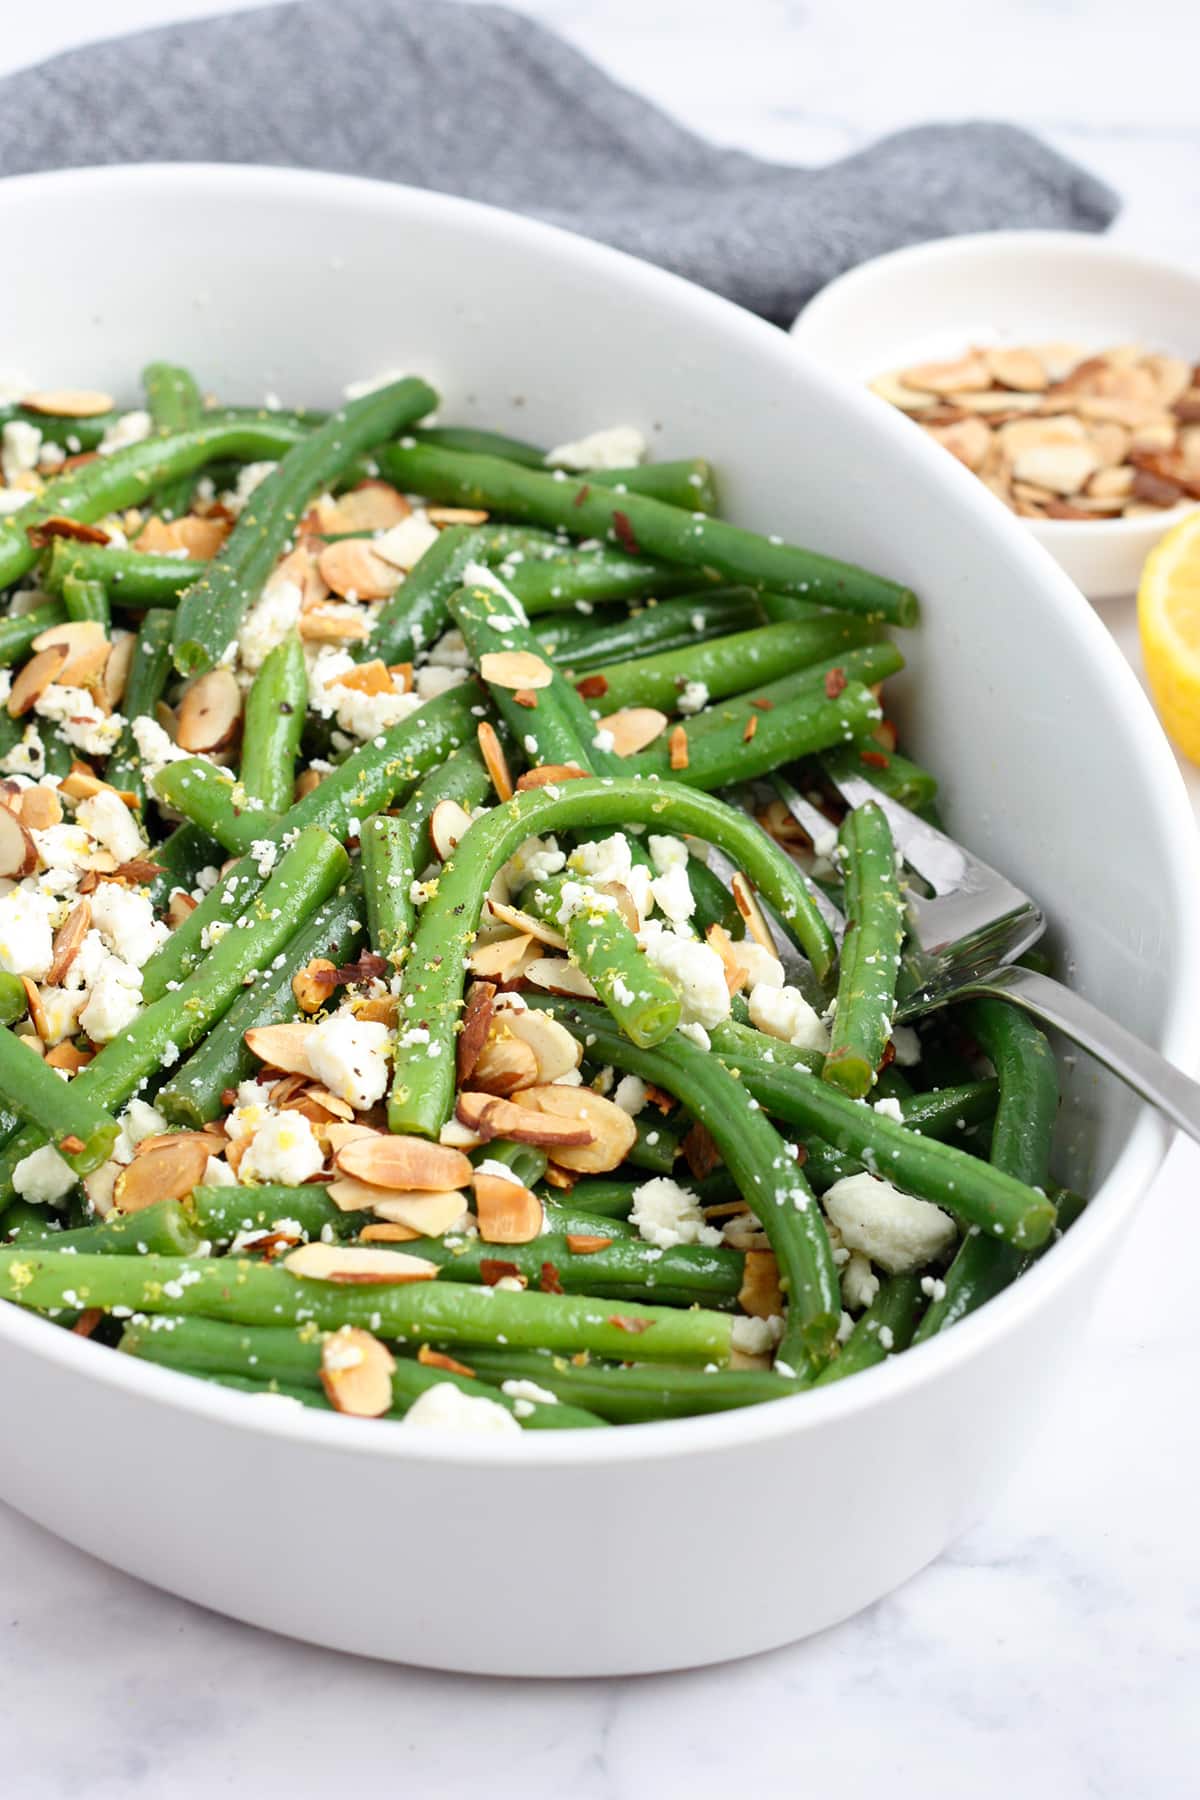 Fresh green beans tossed with a lemon vinaigrette on a serving plate.